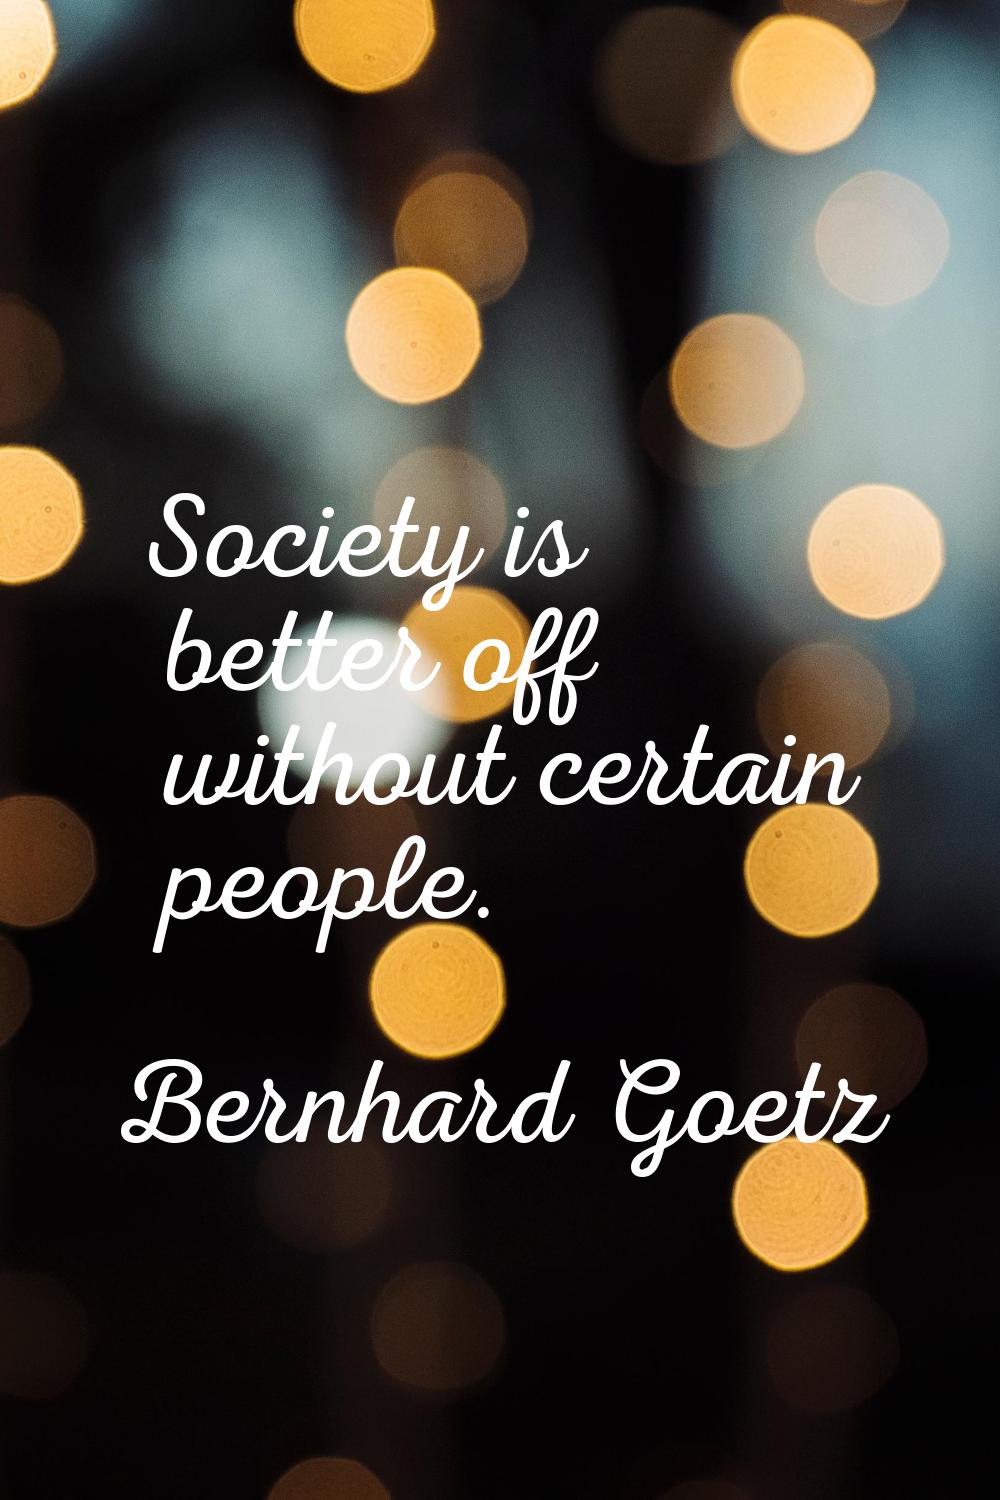 Society is better off without certain people.